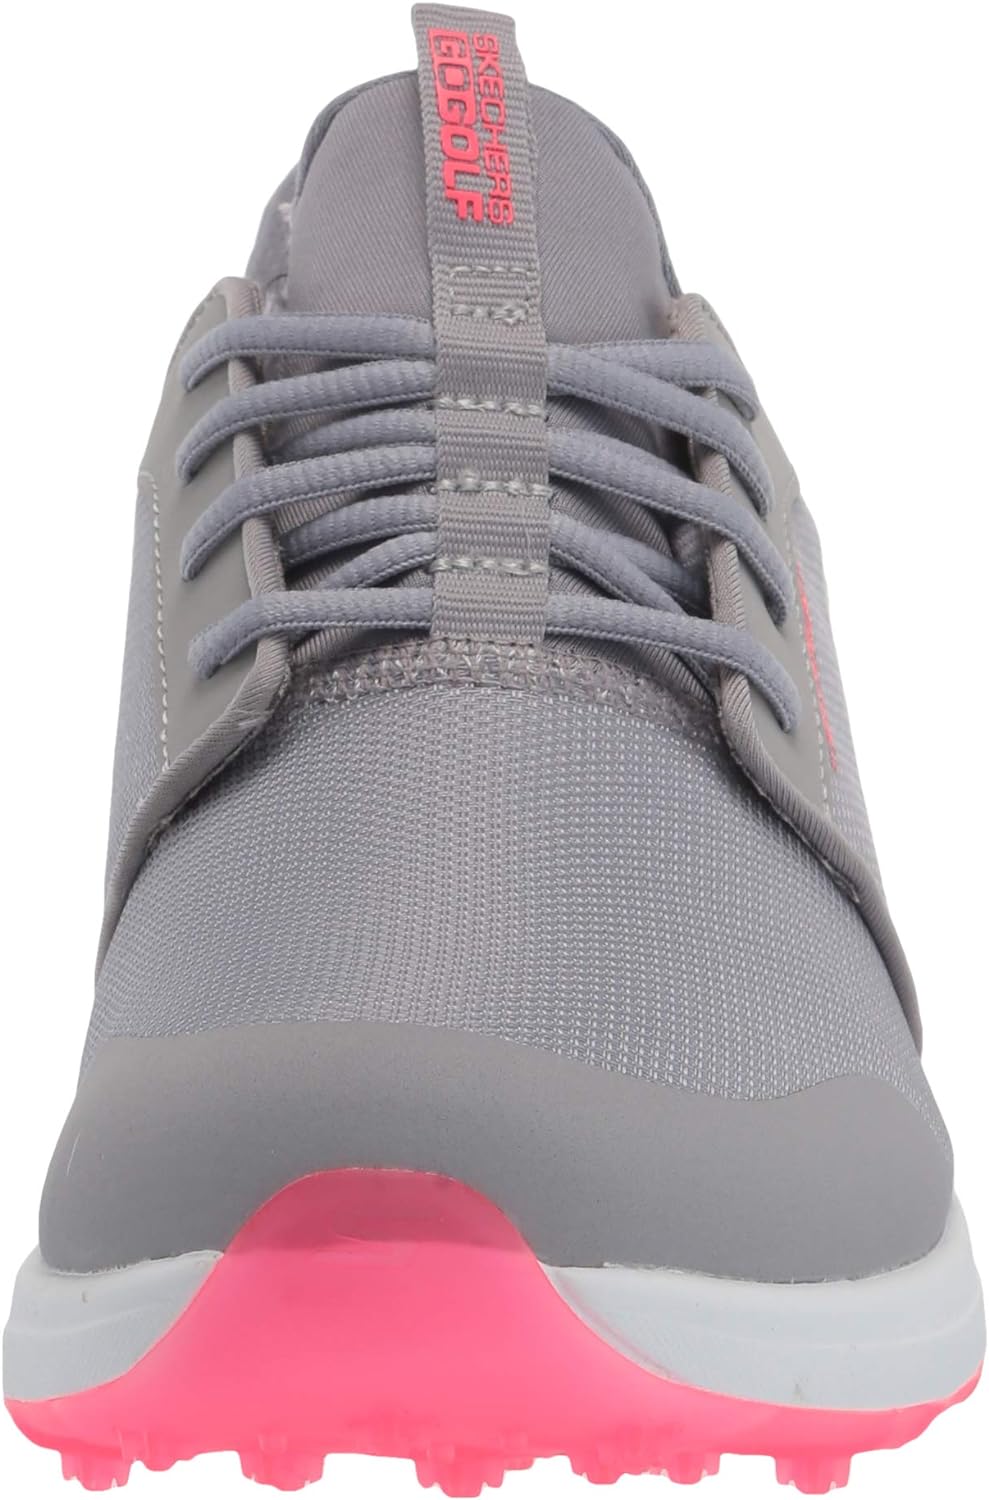 Skechers Women's Max Golf Shoe: The Perfect Blend of Style and Performance